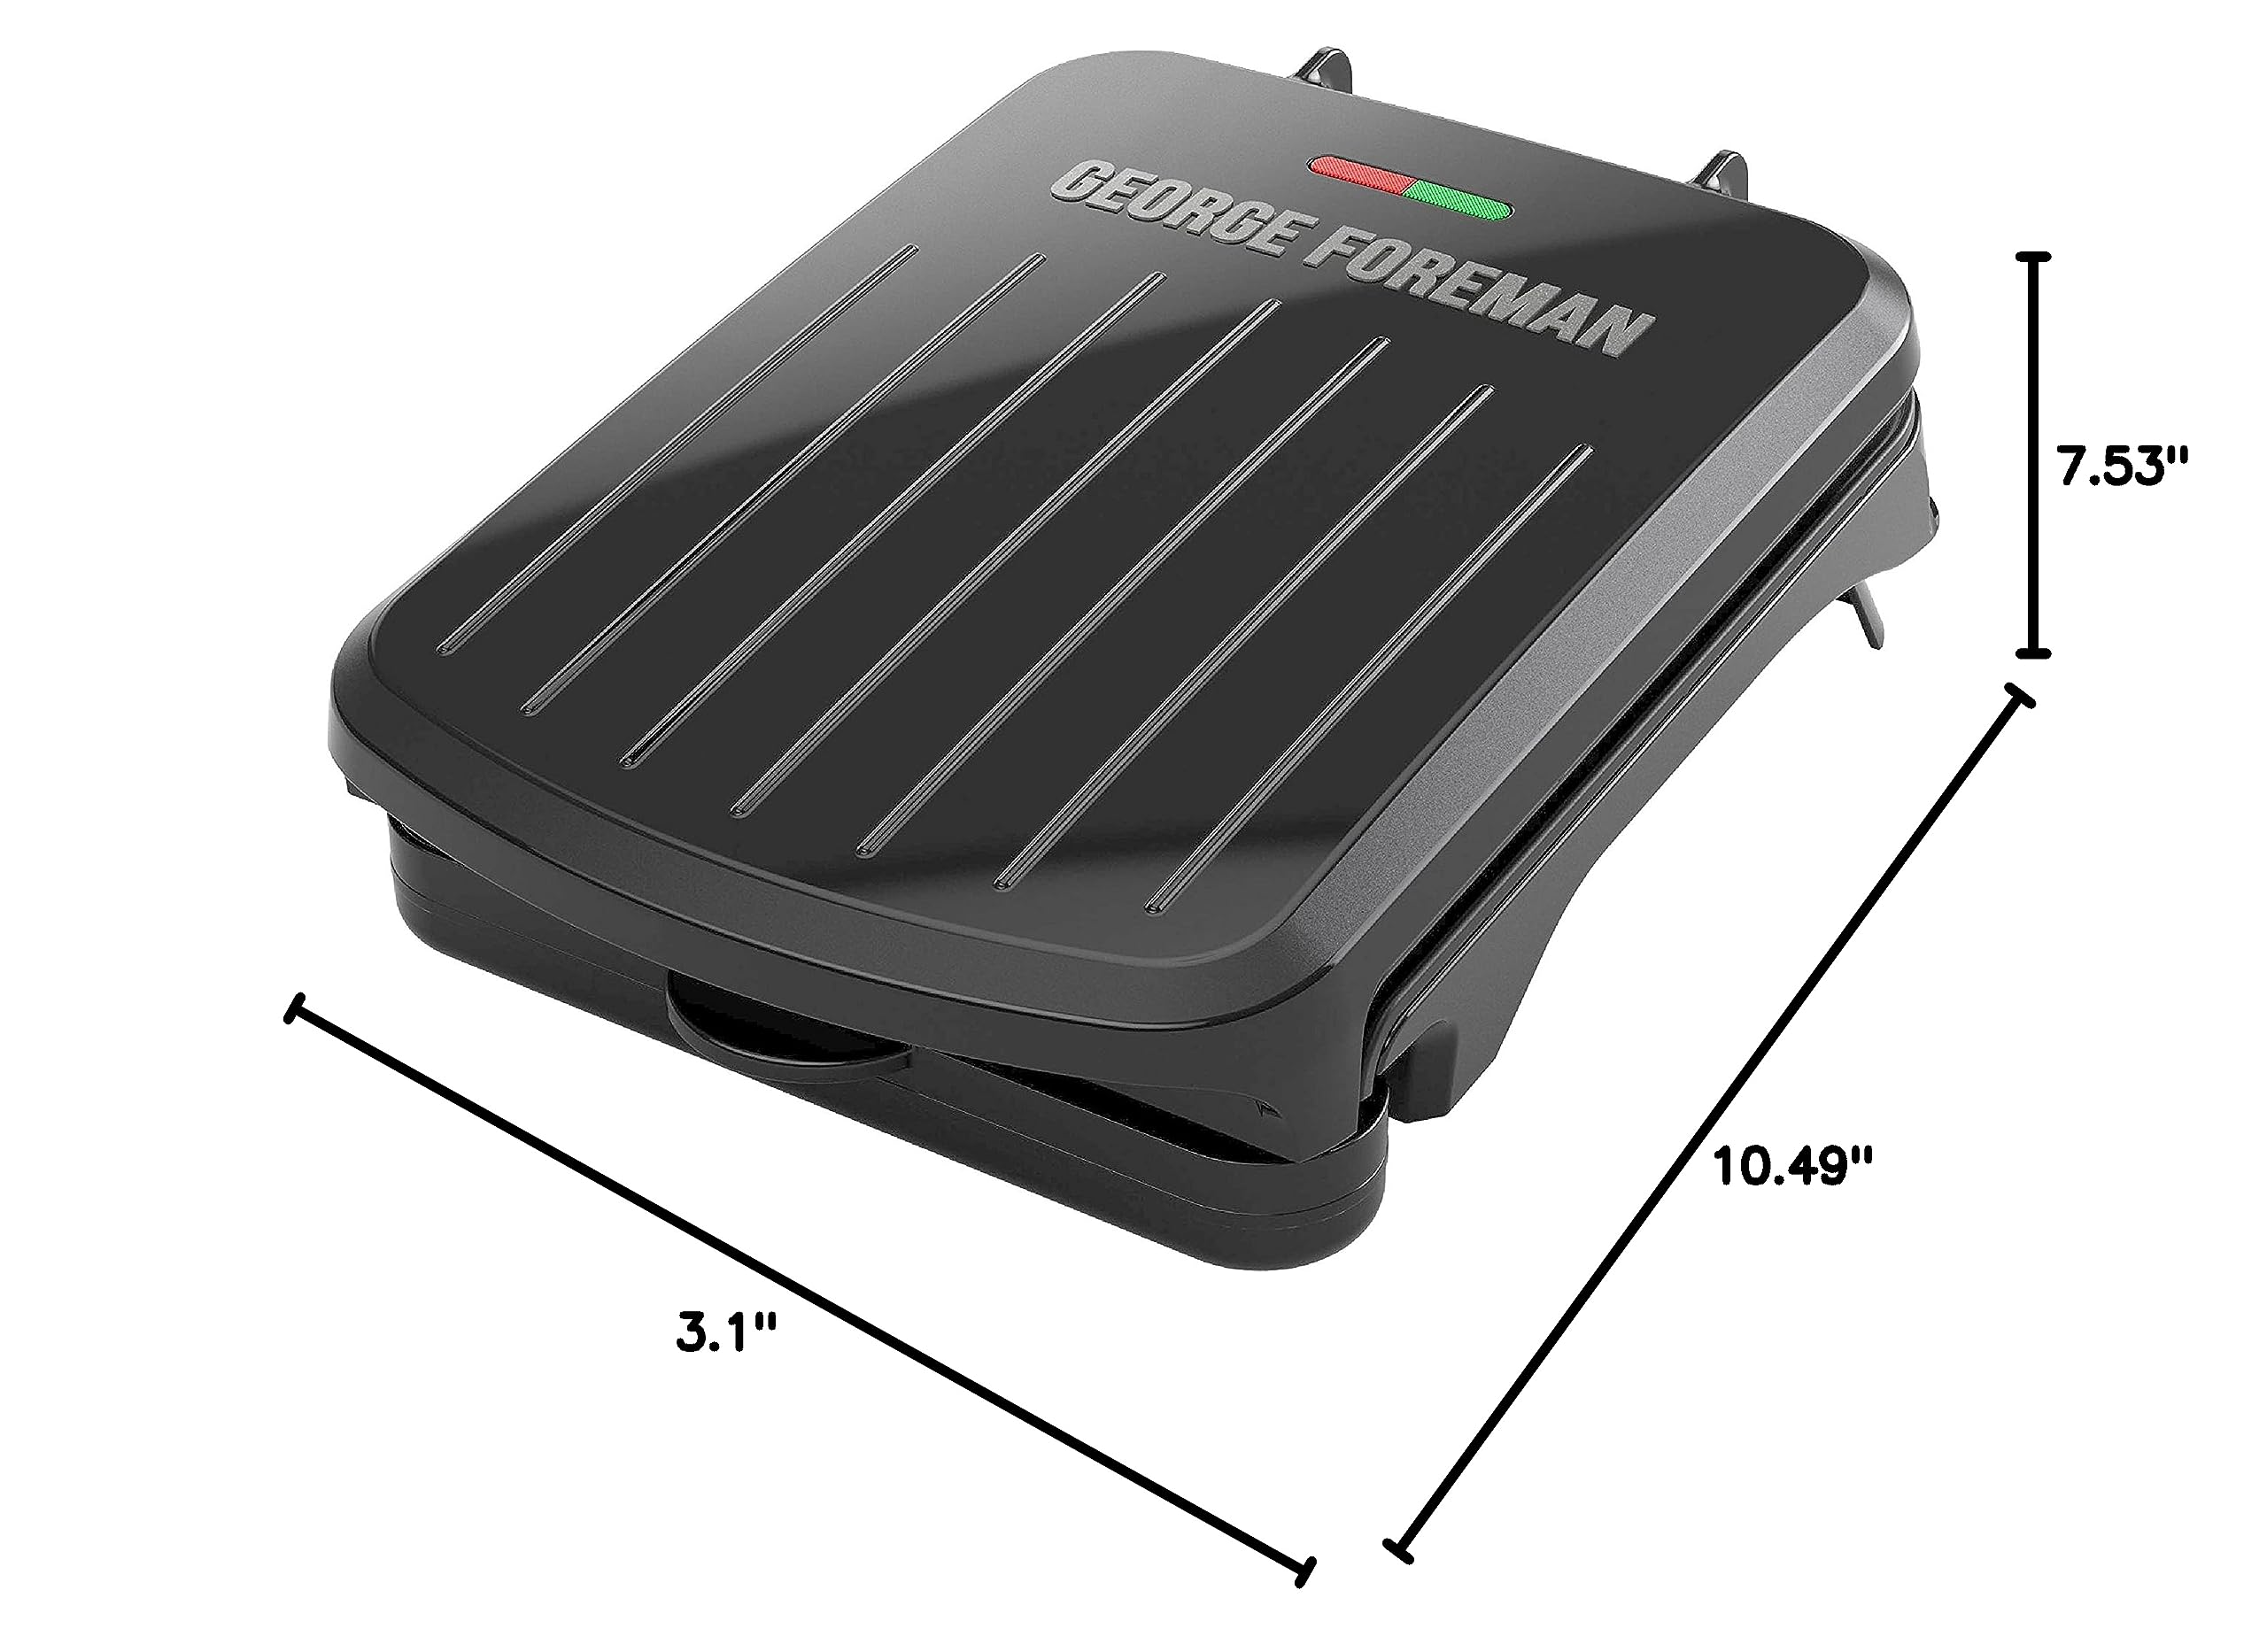 George Foreman 2-Serving Classic Plate Electric Indoor Grill and Panini Press, Black, GRS040B